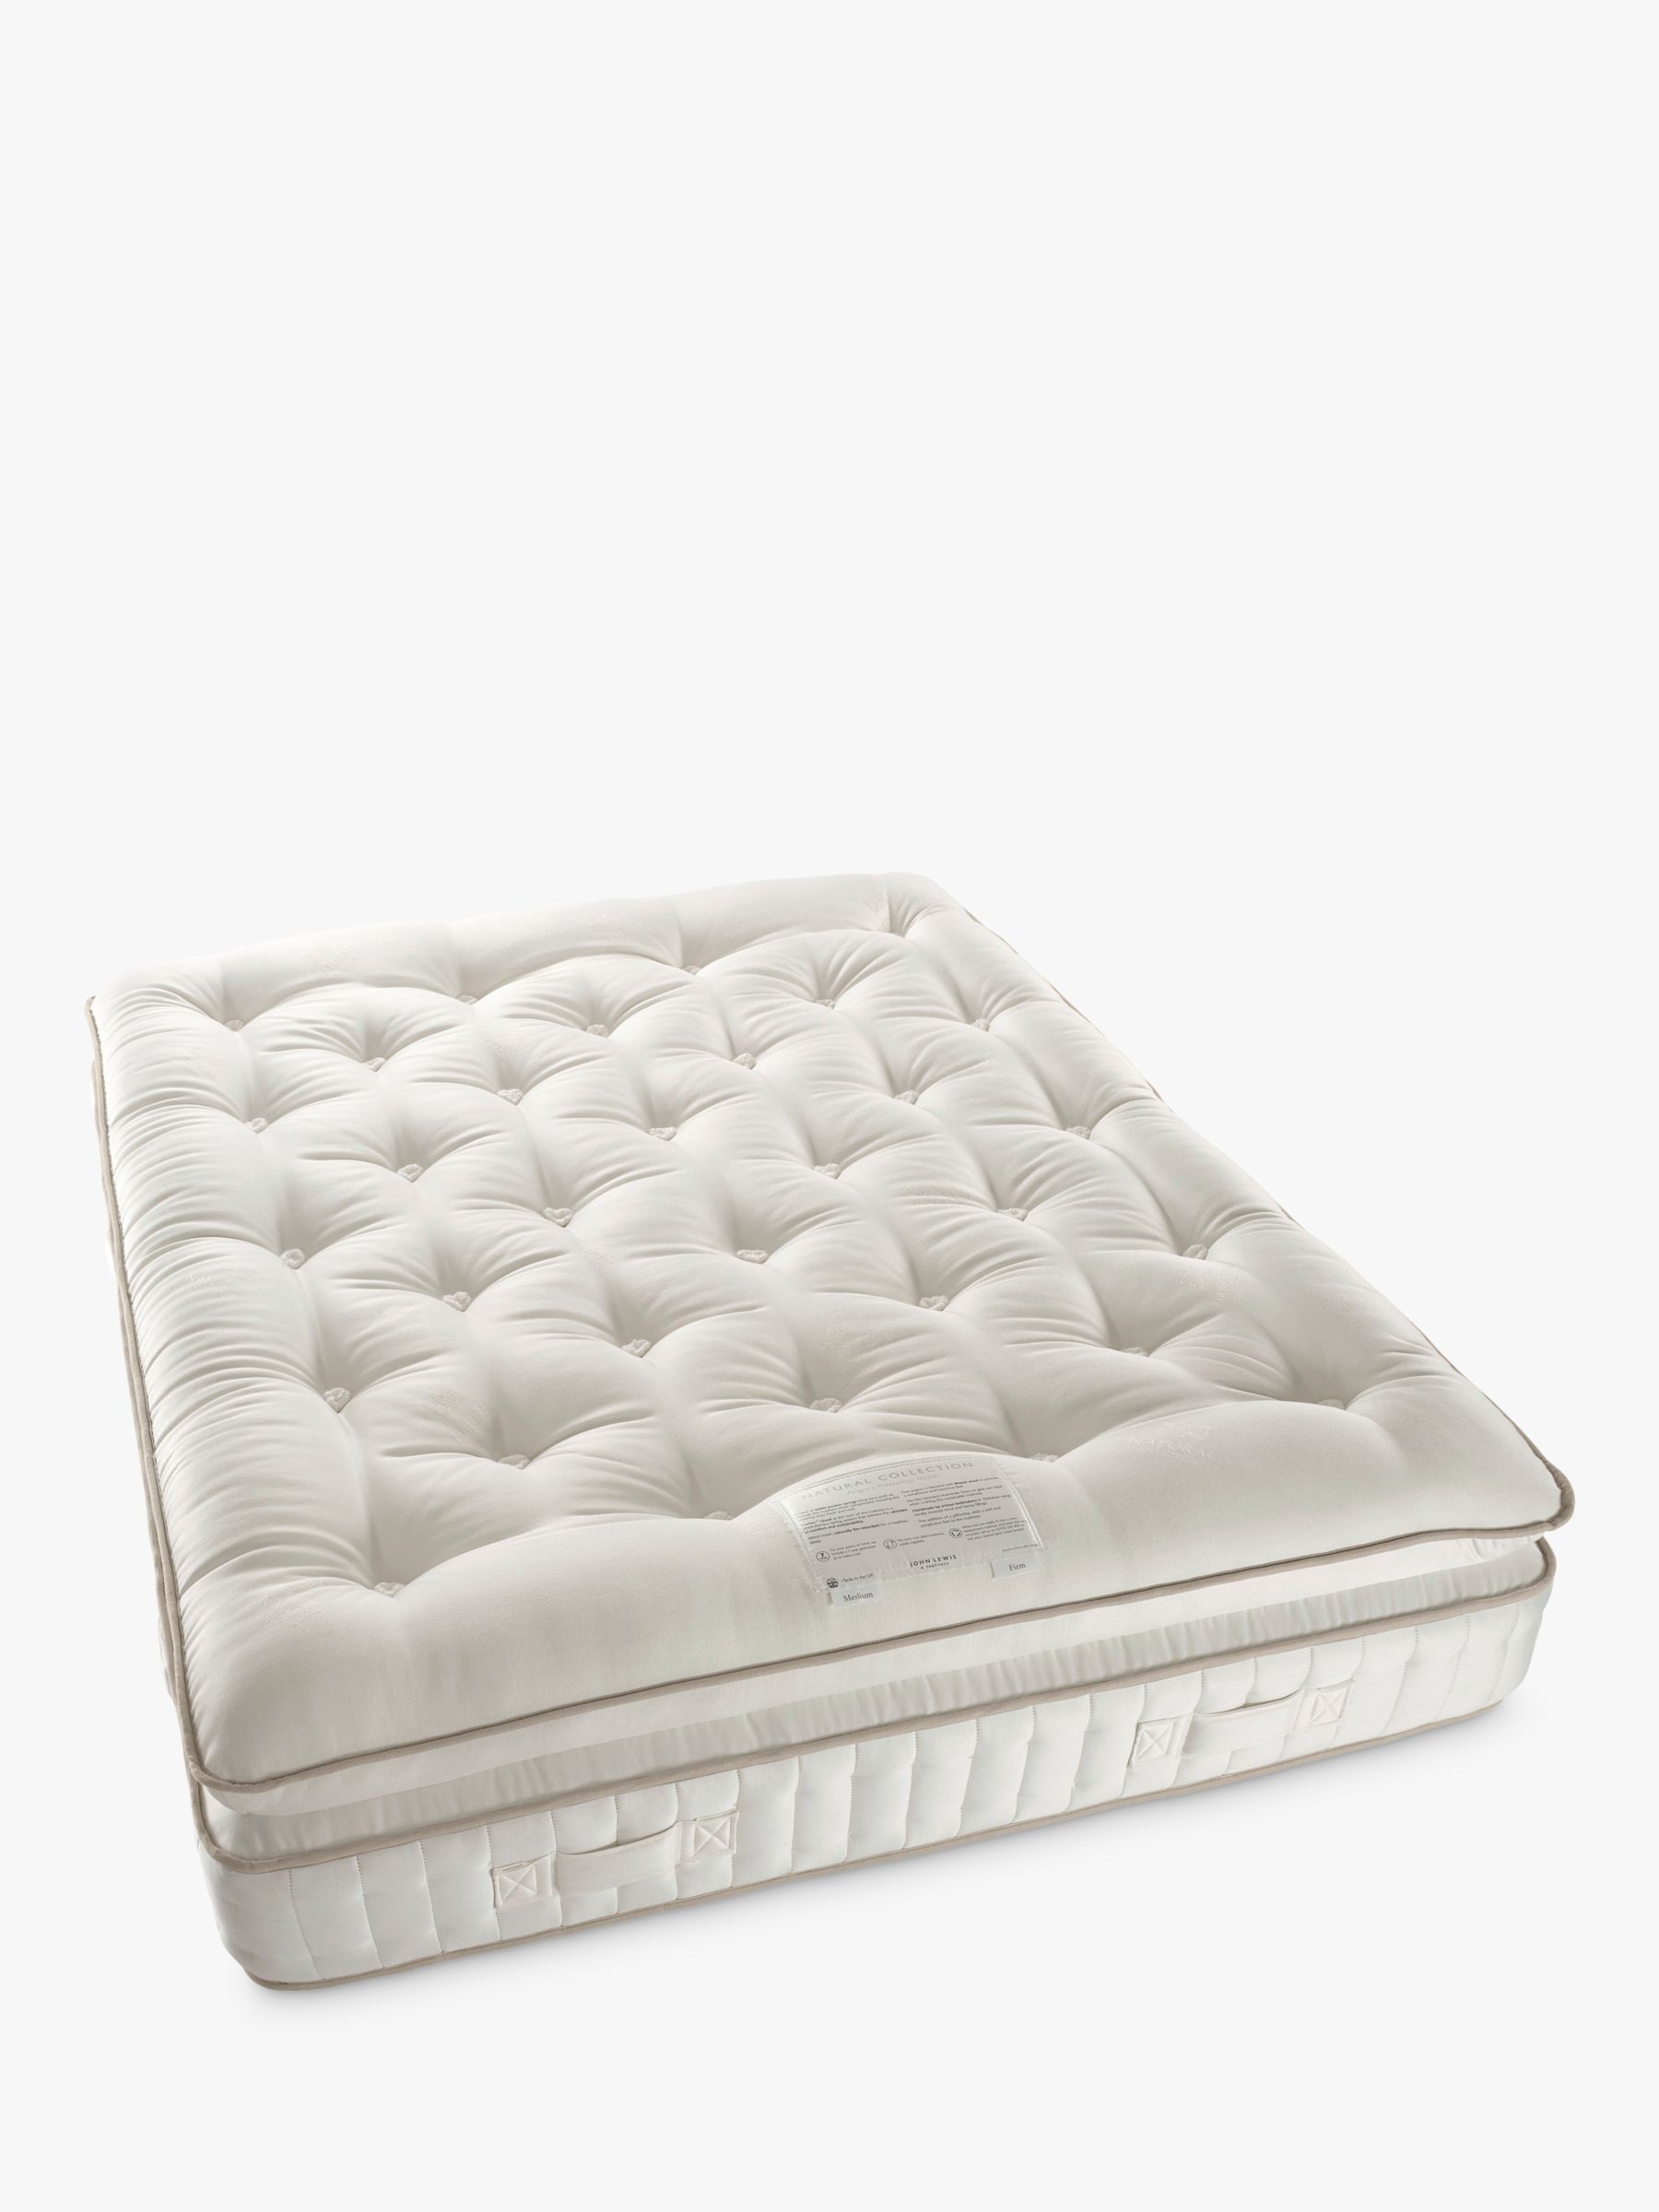 Photo of John lewis luxury natural collection mohair pillowtop 16000 double regular tension pocket spring mattress